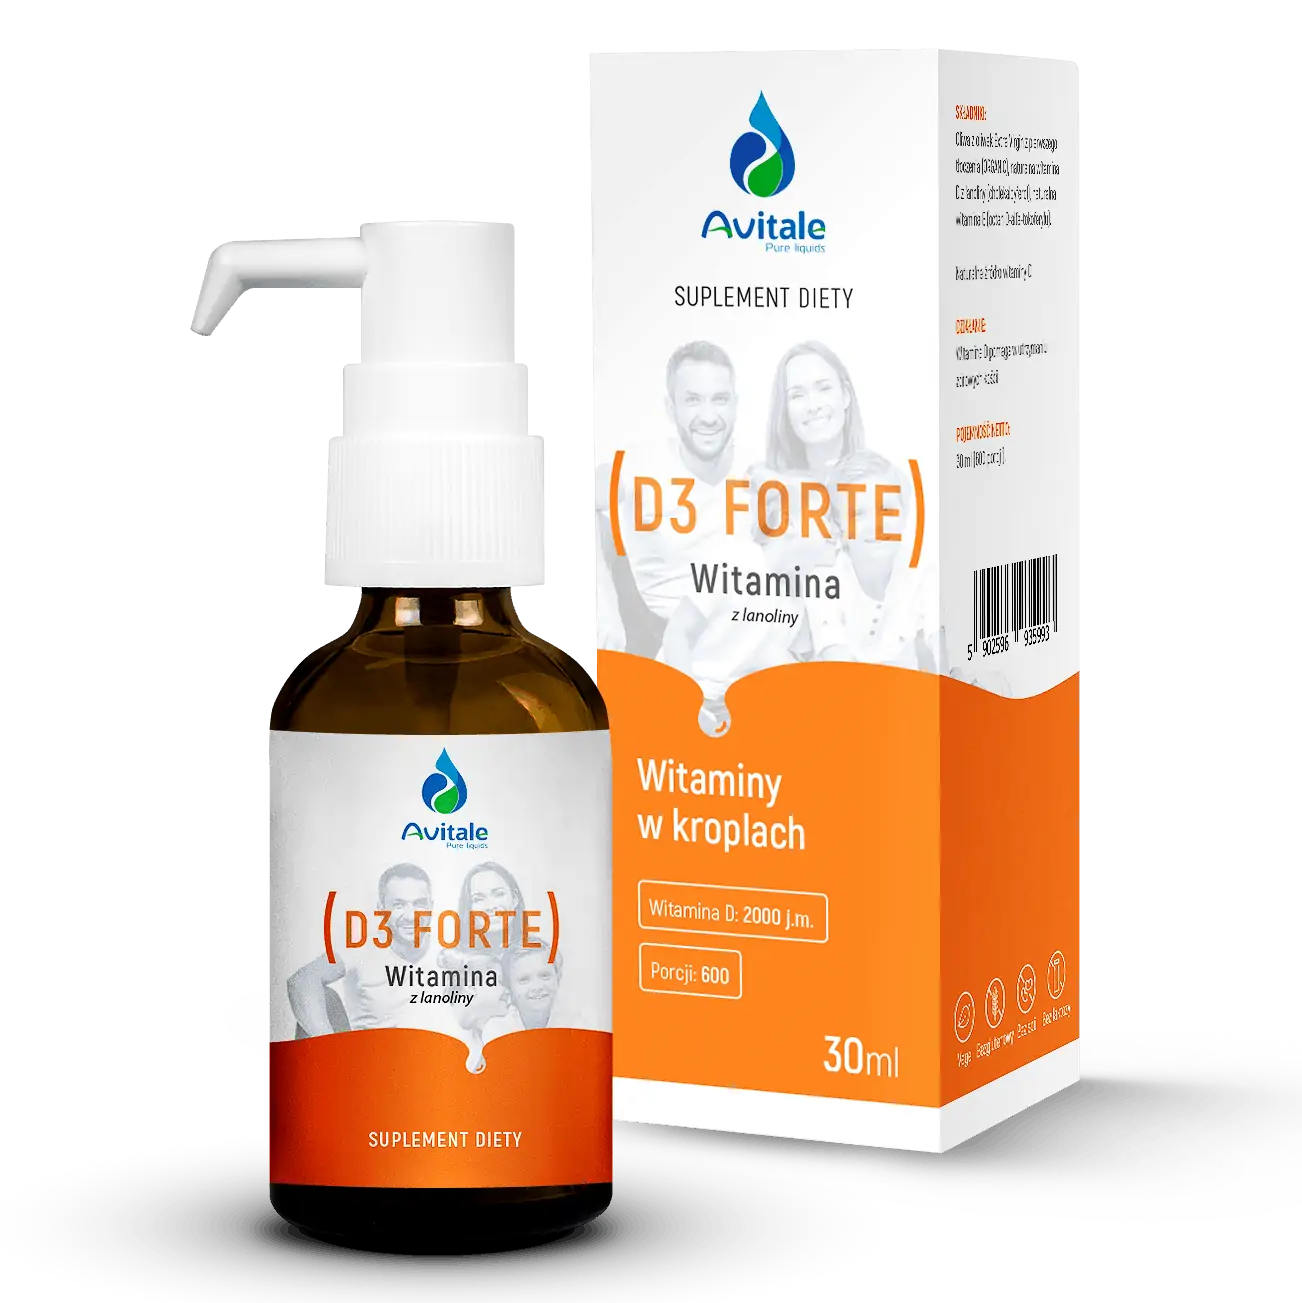 Leeds rooster Carrière Avitale Vitamin D3 Forte 2000 Iu From Lanoline (Vegan Vitamin D3) 30 Ml -  low price, check reviews and dosage